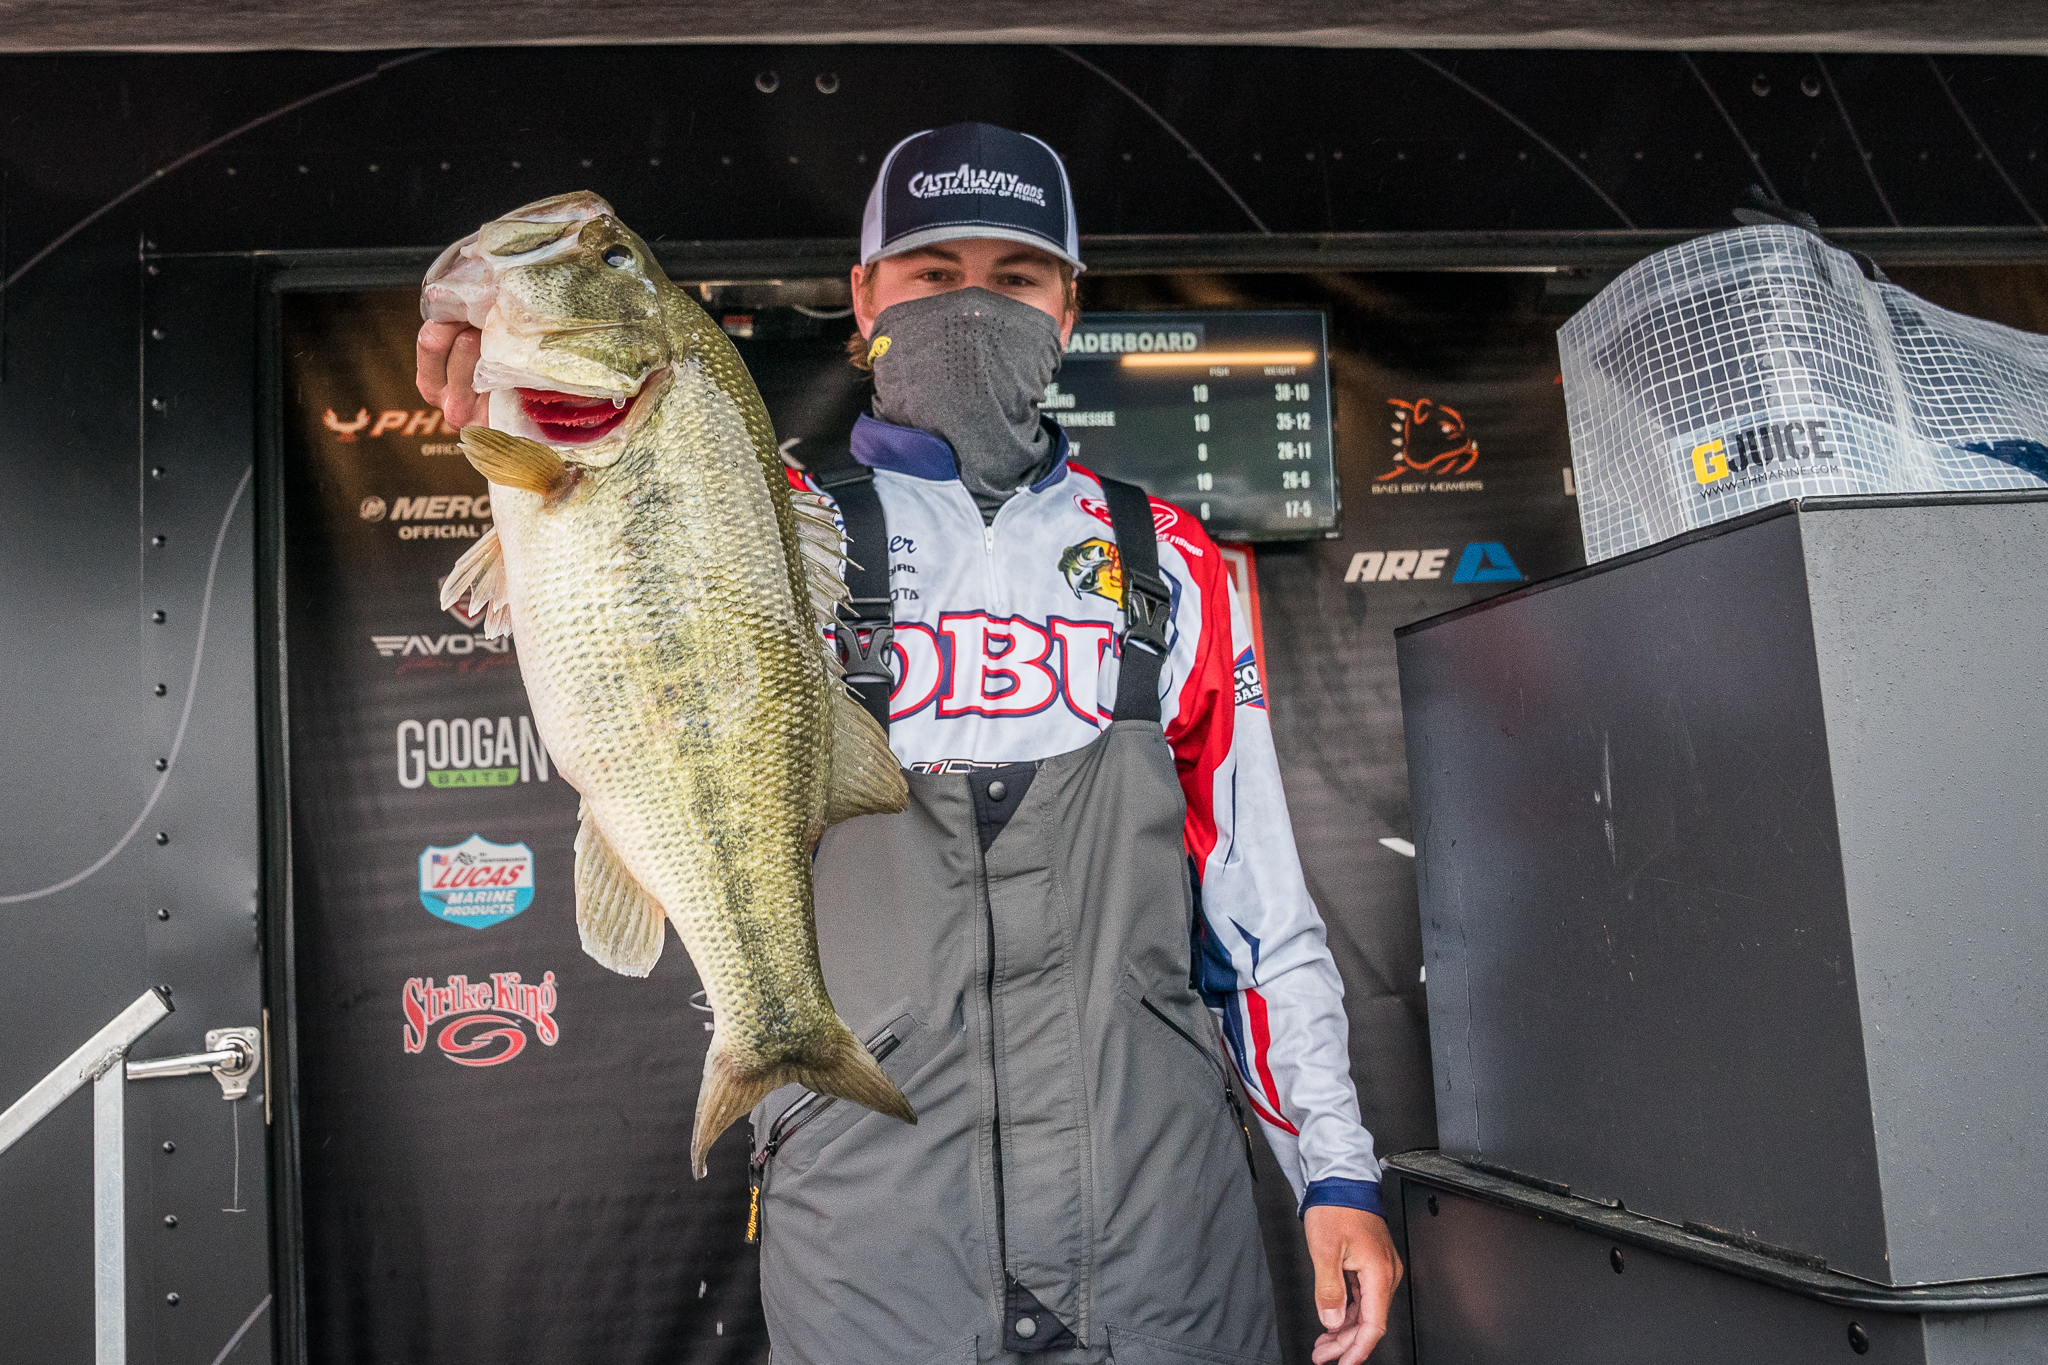 GALLERY: Abu Garcia College Fishing Open, Day 2 Weigh-In - Major